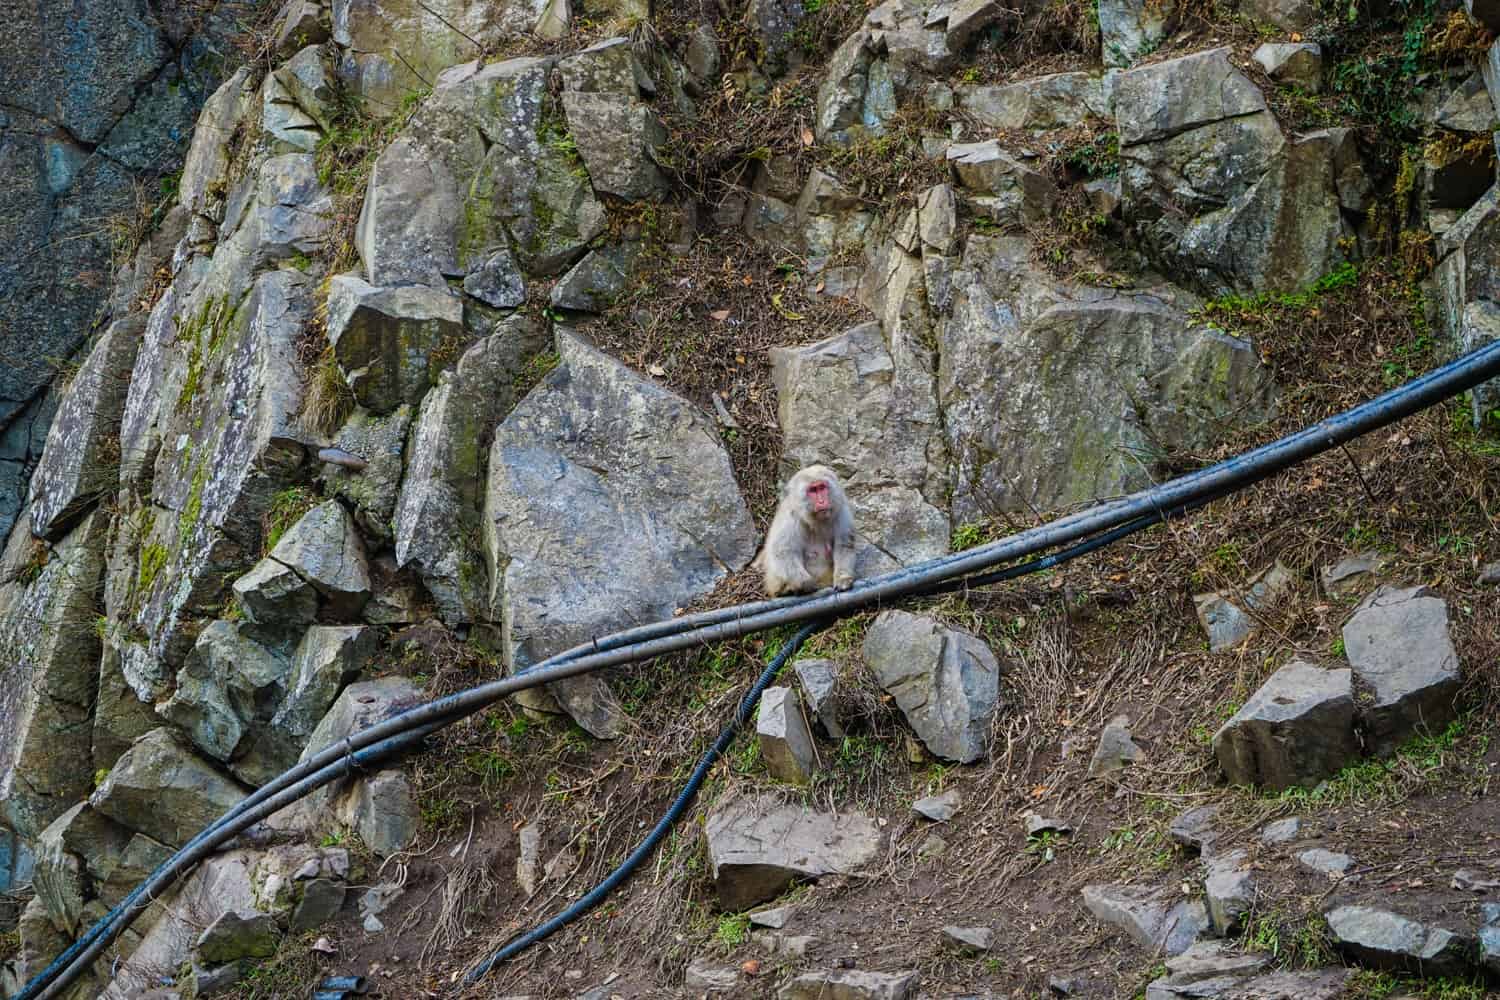 Snow monkey on a cable